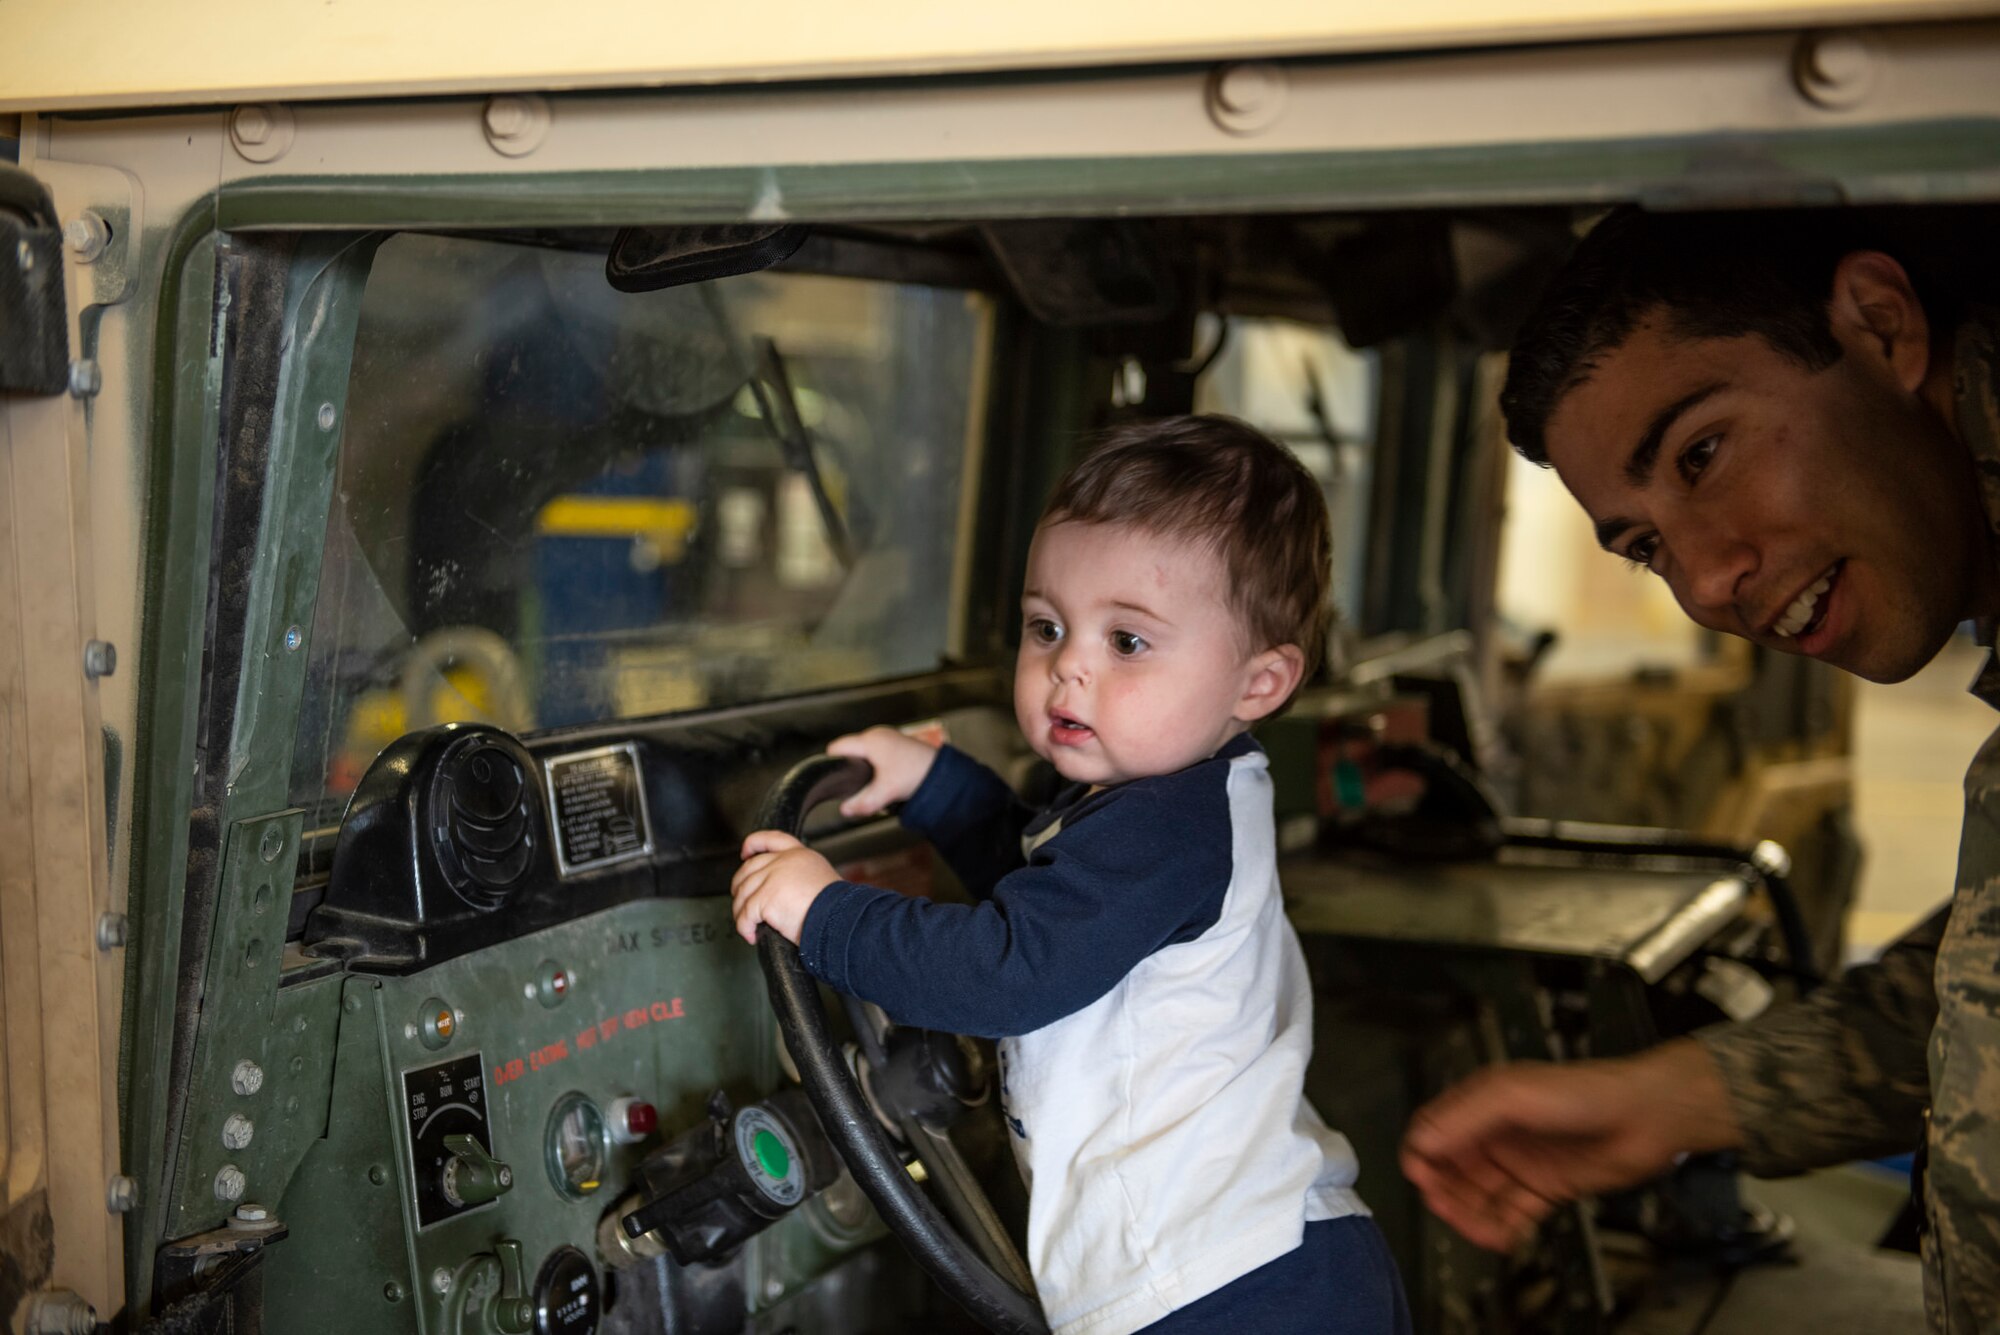 U.S. Air Force Capt. Joshua DeFrank, 377th Logistics Readiness Squadron deputy commander, plays with his son, James, in a Humvee during a spouse immersion event for the LRS vehicle management flight at Kirtland Air Force Base, N.M., Oct. 30. Key spouses participated in the spouse immersion event to familiarize themselves with the vehicle management flight and provide them with an overview of their mission and resources that support Team Kirtland. Spouses and children were able to explore the different vehicles that the flight manages and maintains. (U.S. Air Force photo by Airman 1st Class Austin J. Prisbrey)